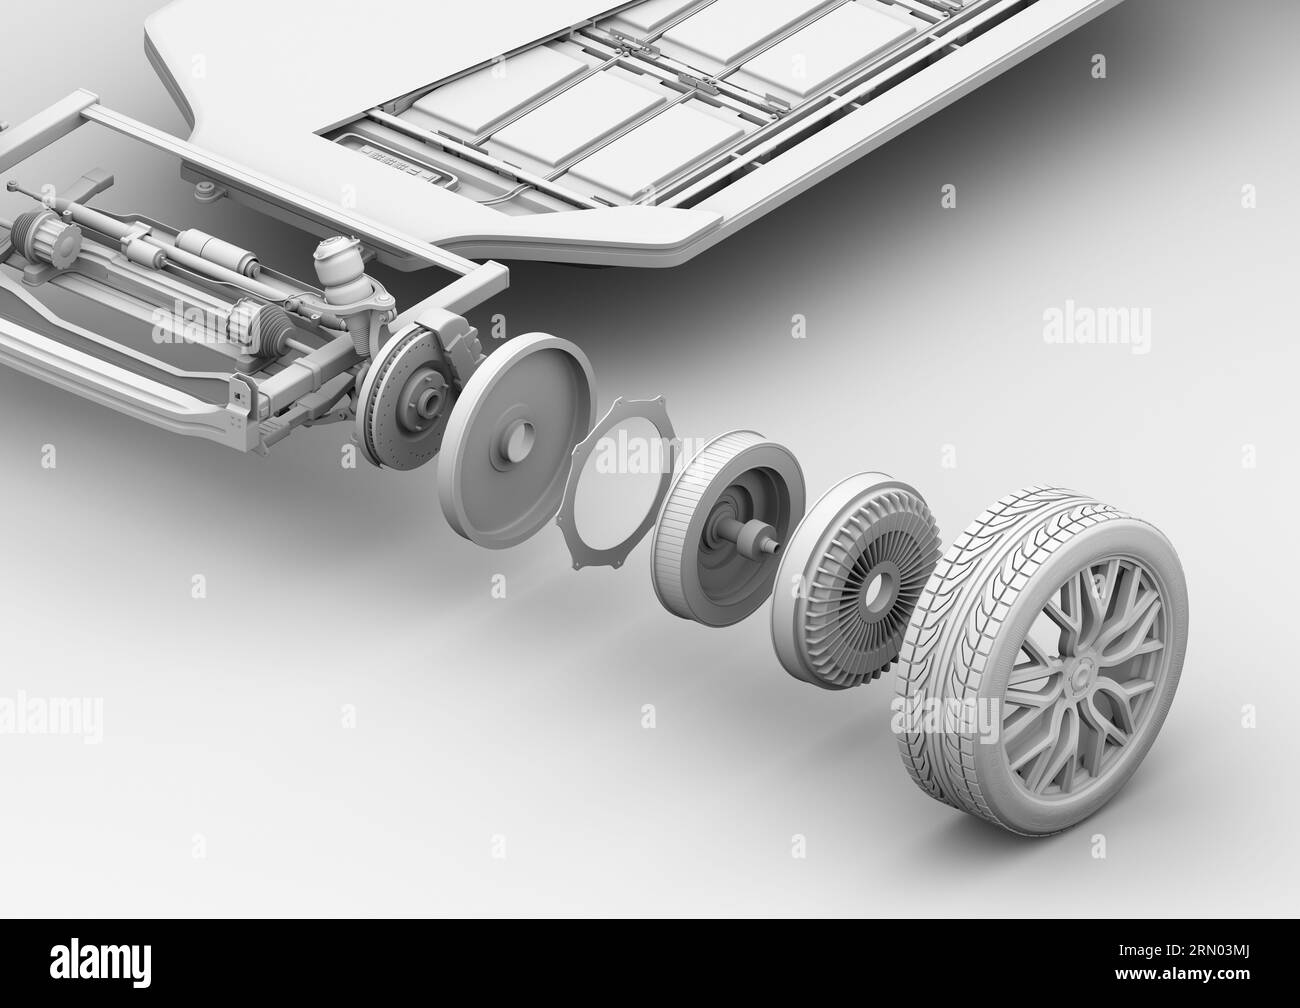 Isometric view Black and White Stock Photos & Images - Alamy